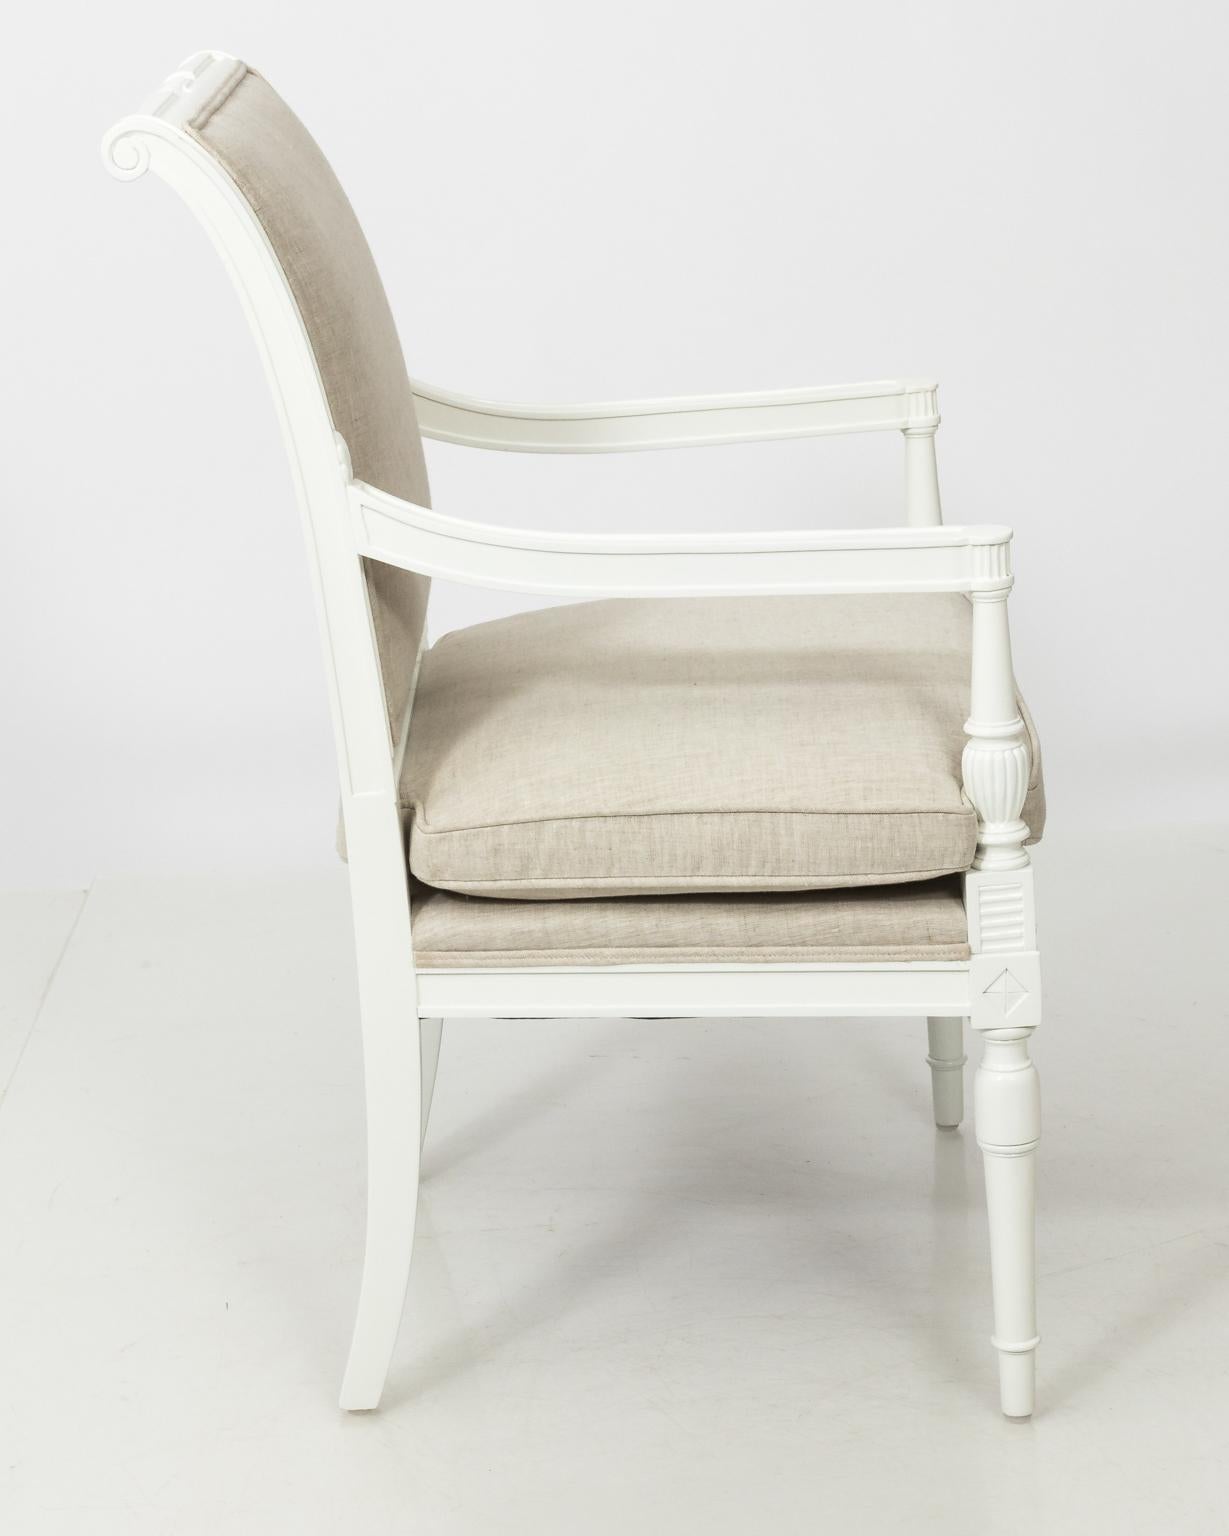 Pair of 1950s Louis XV style white painted armchairs with vase turned arm supports in newly upholstered fabric.
     